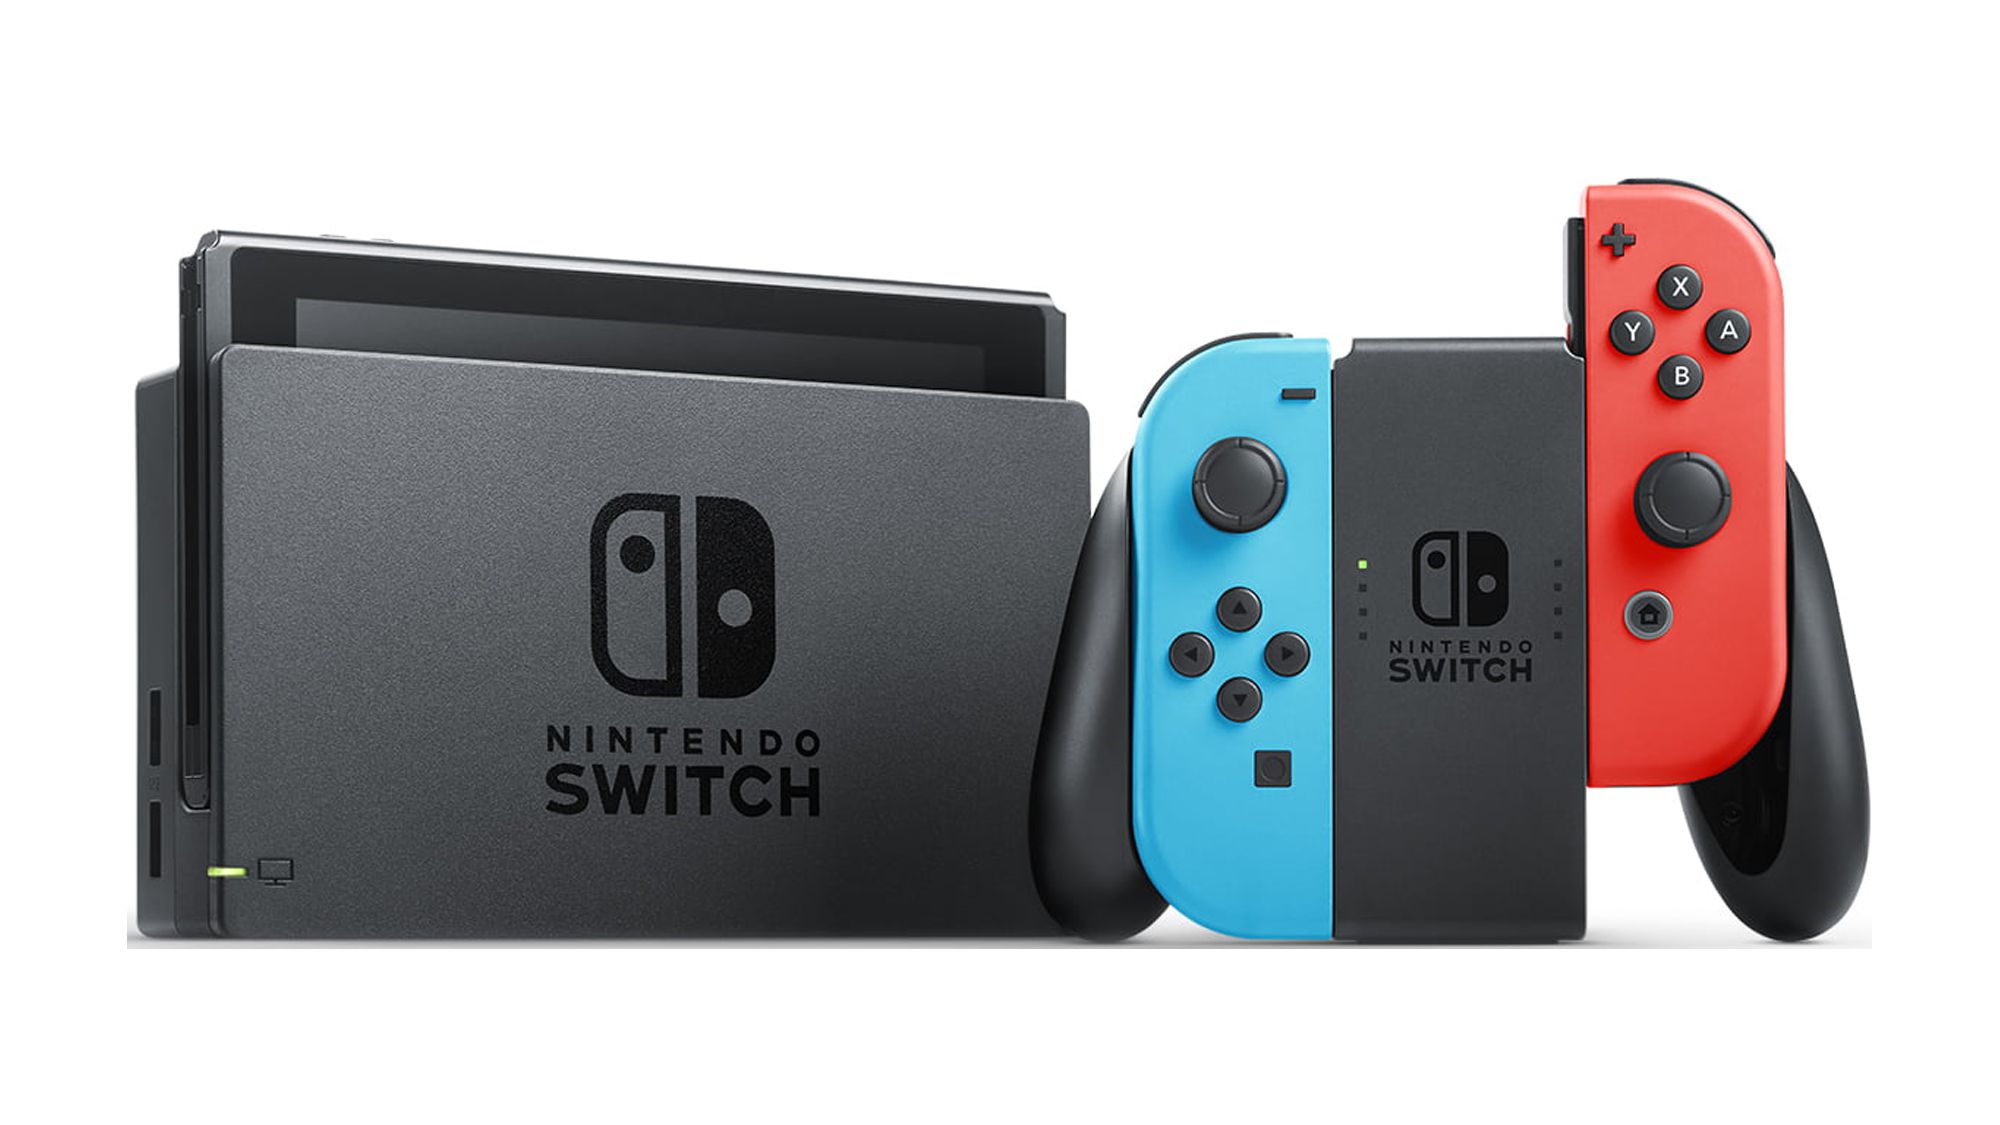 Nintendo Switch™ w/ Neon Blue & Neon Red Joy-Con + 12 Month Individual Membership Nintendo Switch Online + Carrying Case - image 3 of 3